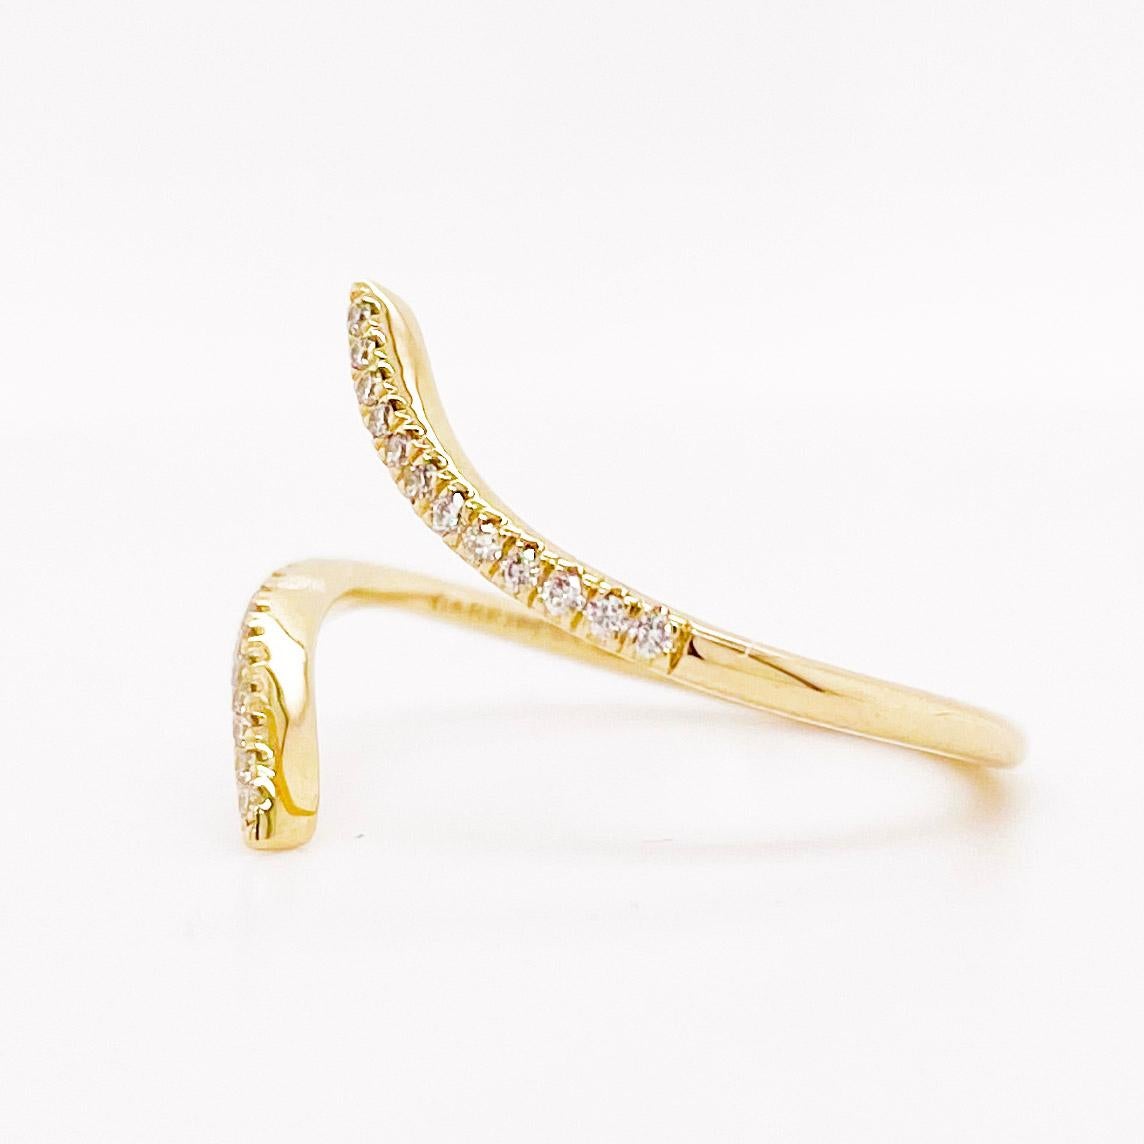 For Sale:  Diamond Bypass Ring in 14K Yellow Gold Minimalist Wrap Ring w Diamonds 2